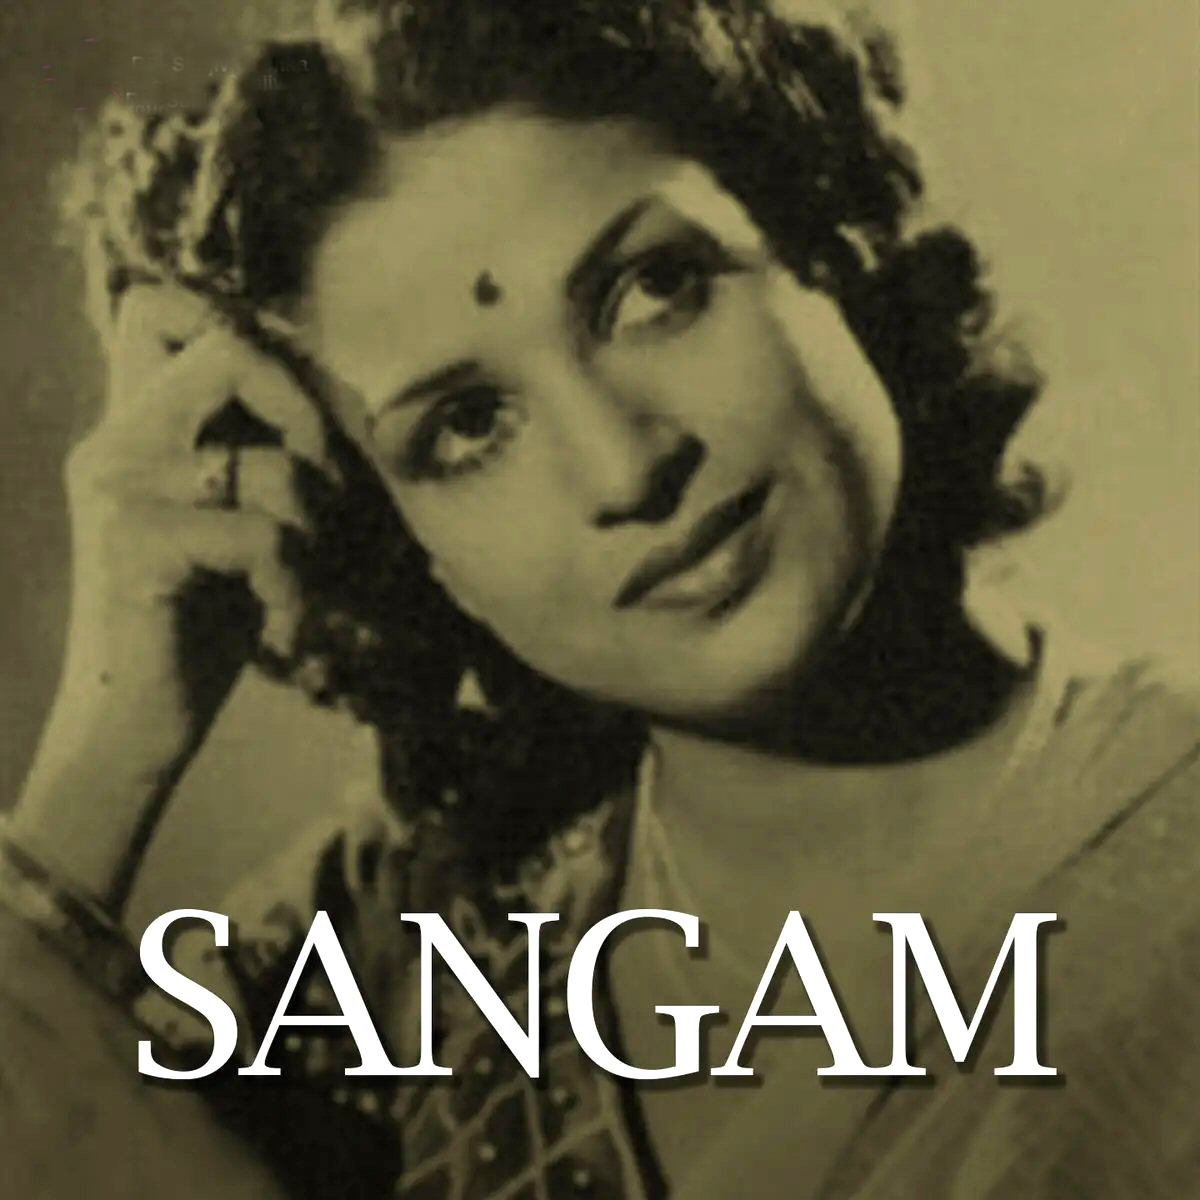 sangam-movie-review-release-date-1954-songs-music-images